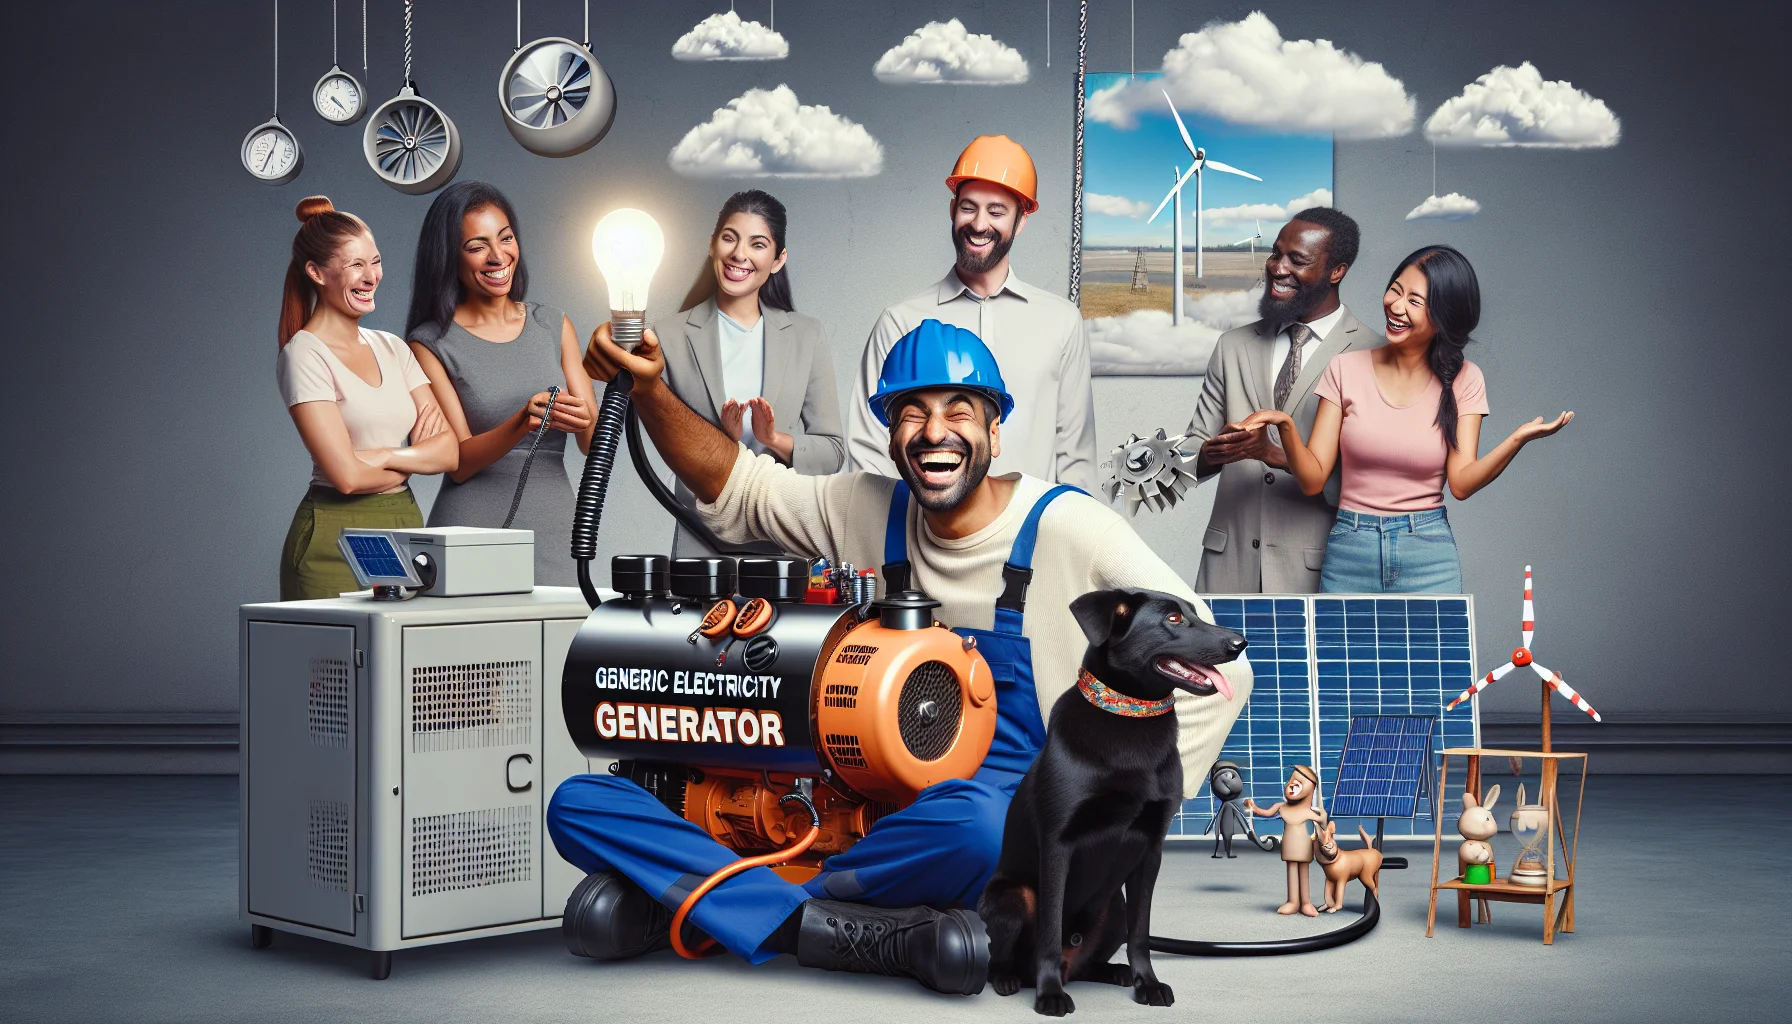 Create a humorous imagery in a realistic style showcasing a generic electricity generator category. Visualize a South Asian man in an electrician's outfit, cheerfully pampering a large generator as if it is his pet. Around them, a group of mixed race people - Caucasian woman, Hispanic man, and Black woman - watch in amusement, each holding renewable energy gadgets like a solar cell and a windmill model, smiling as they see the generator purr to life and light up a lamp. The image should evoke a sense of fun and motivation to generate electricity.